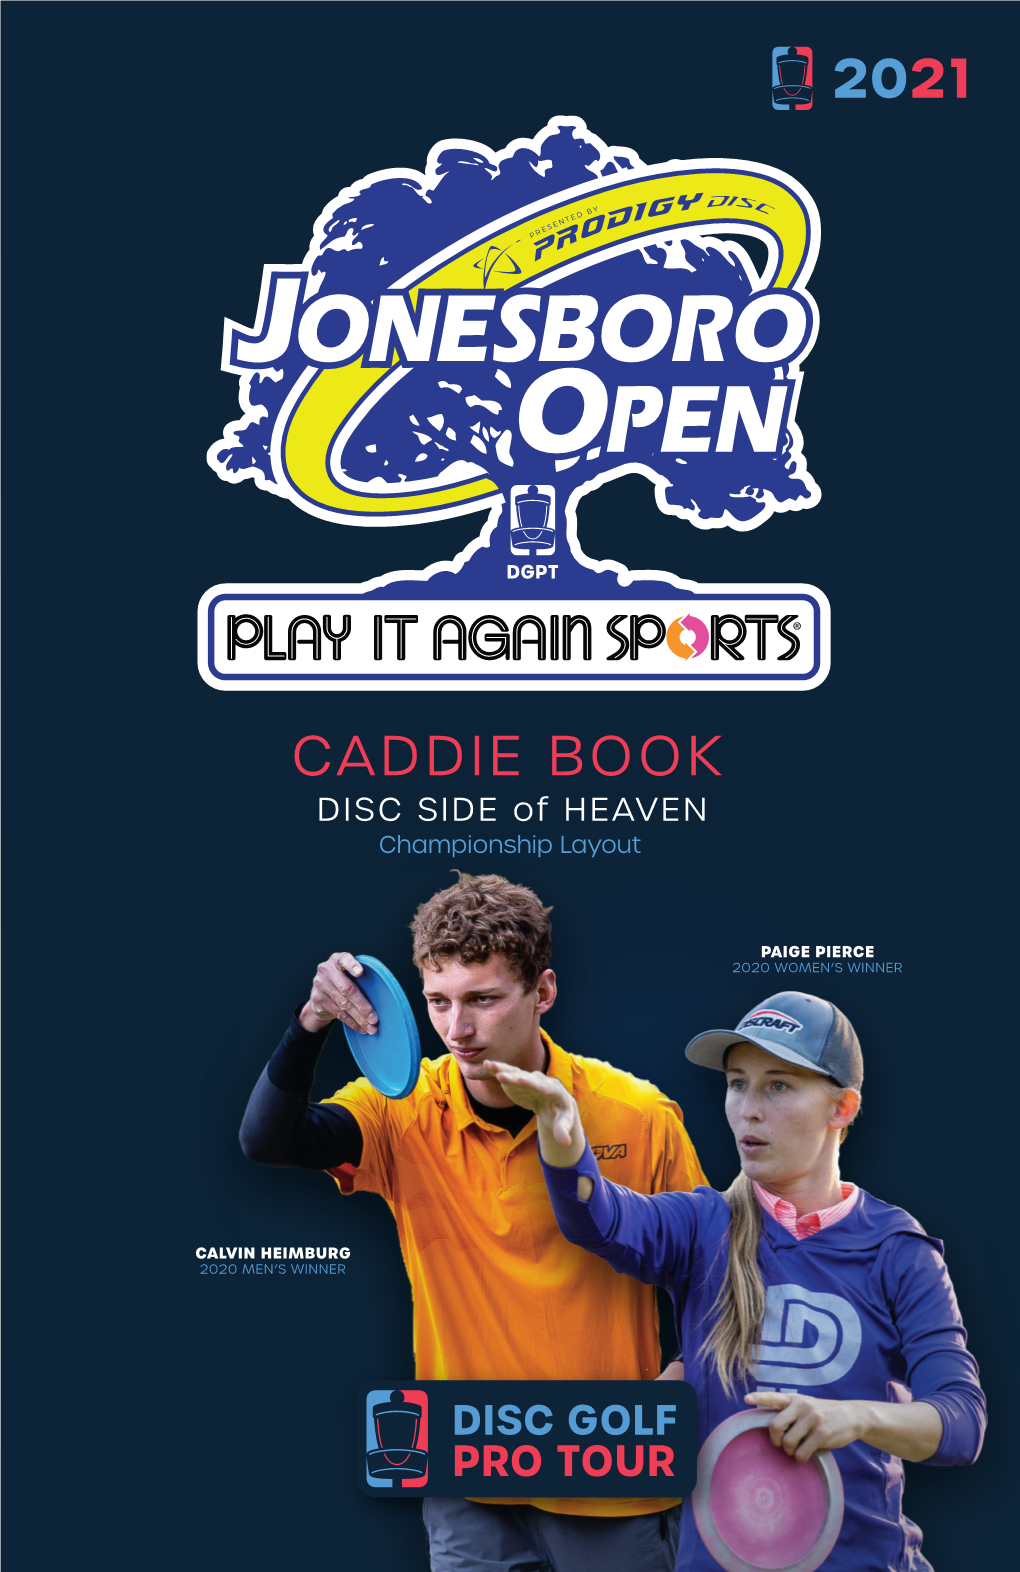 CADDIE BOOK DISC SIDE of HEAVEN Championship Layout